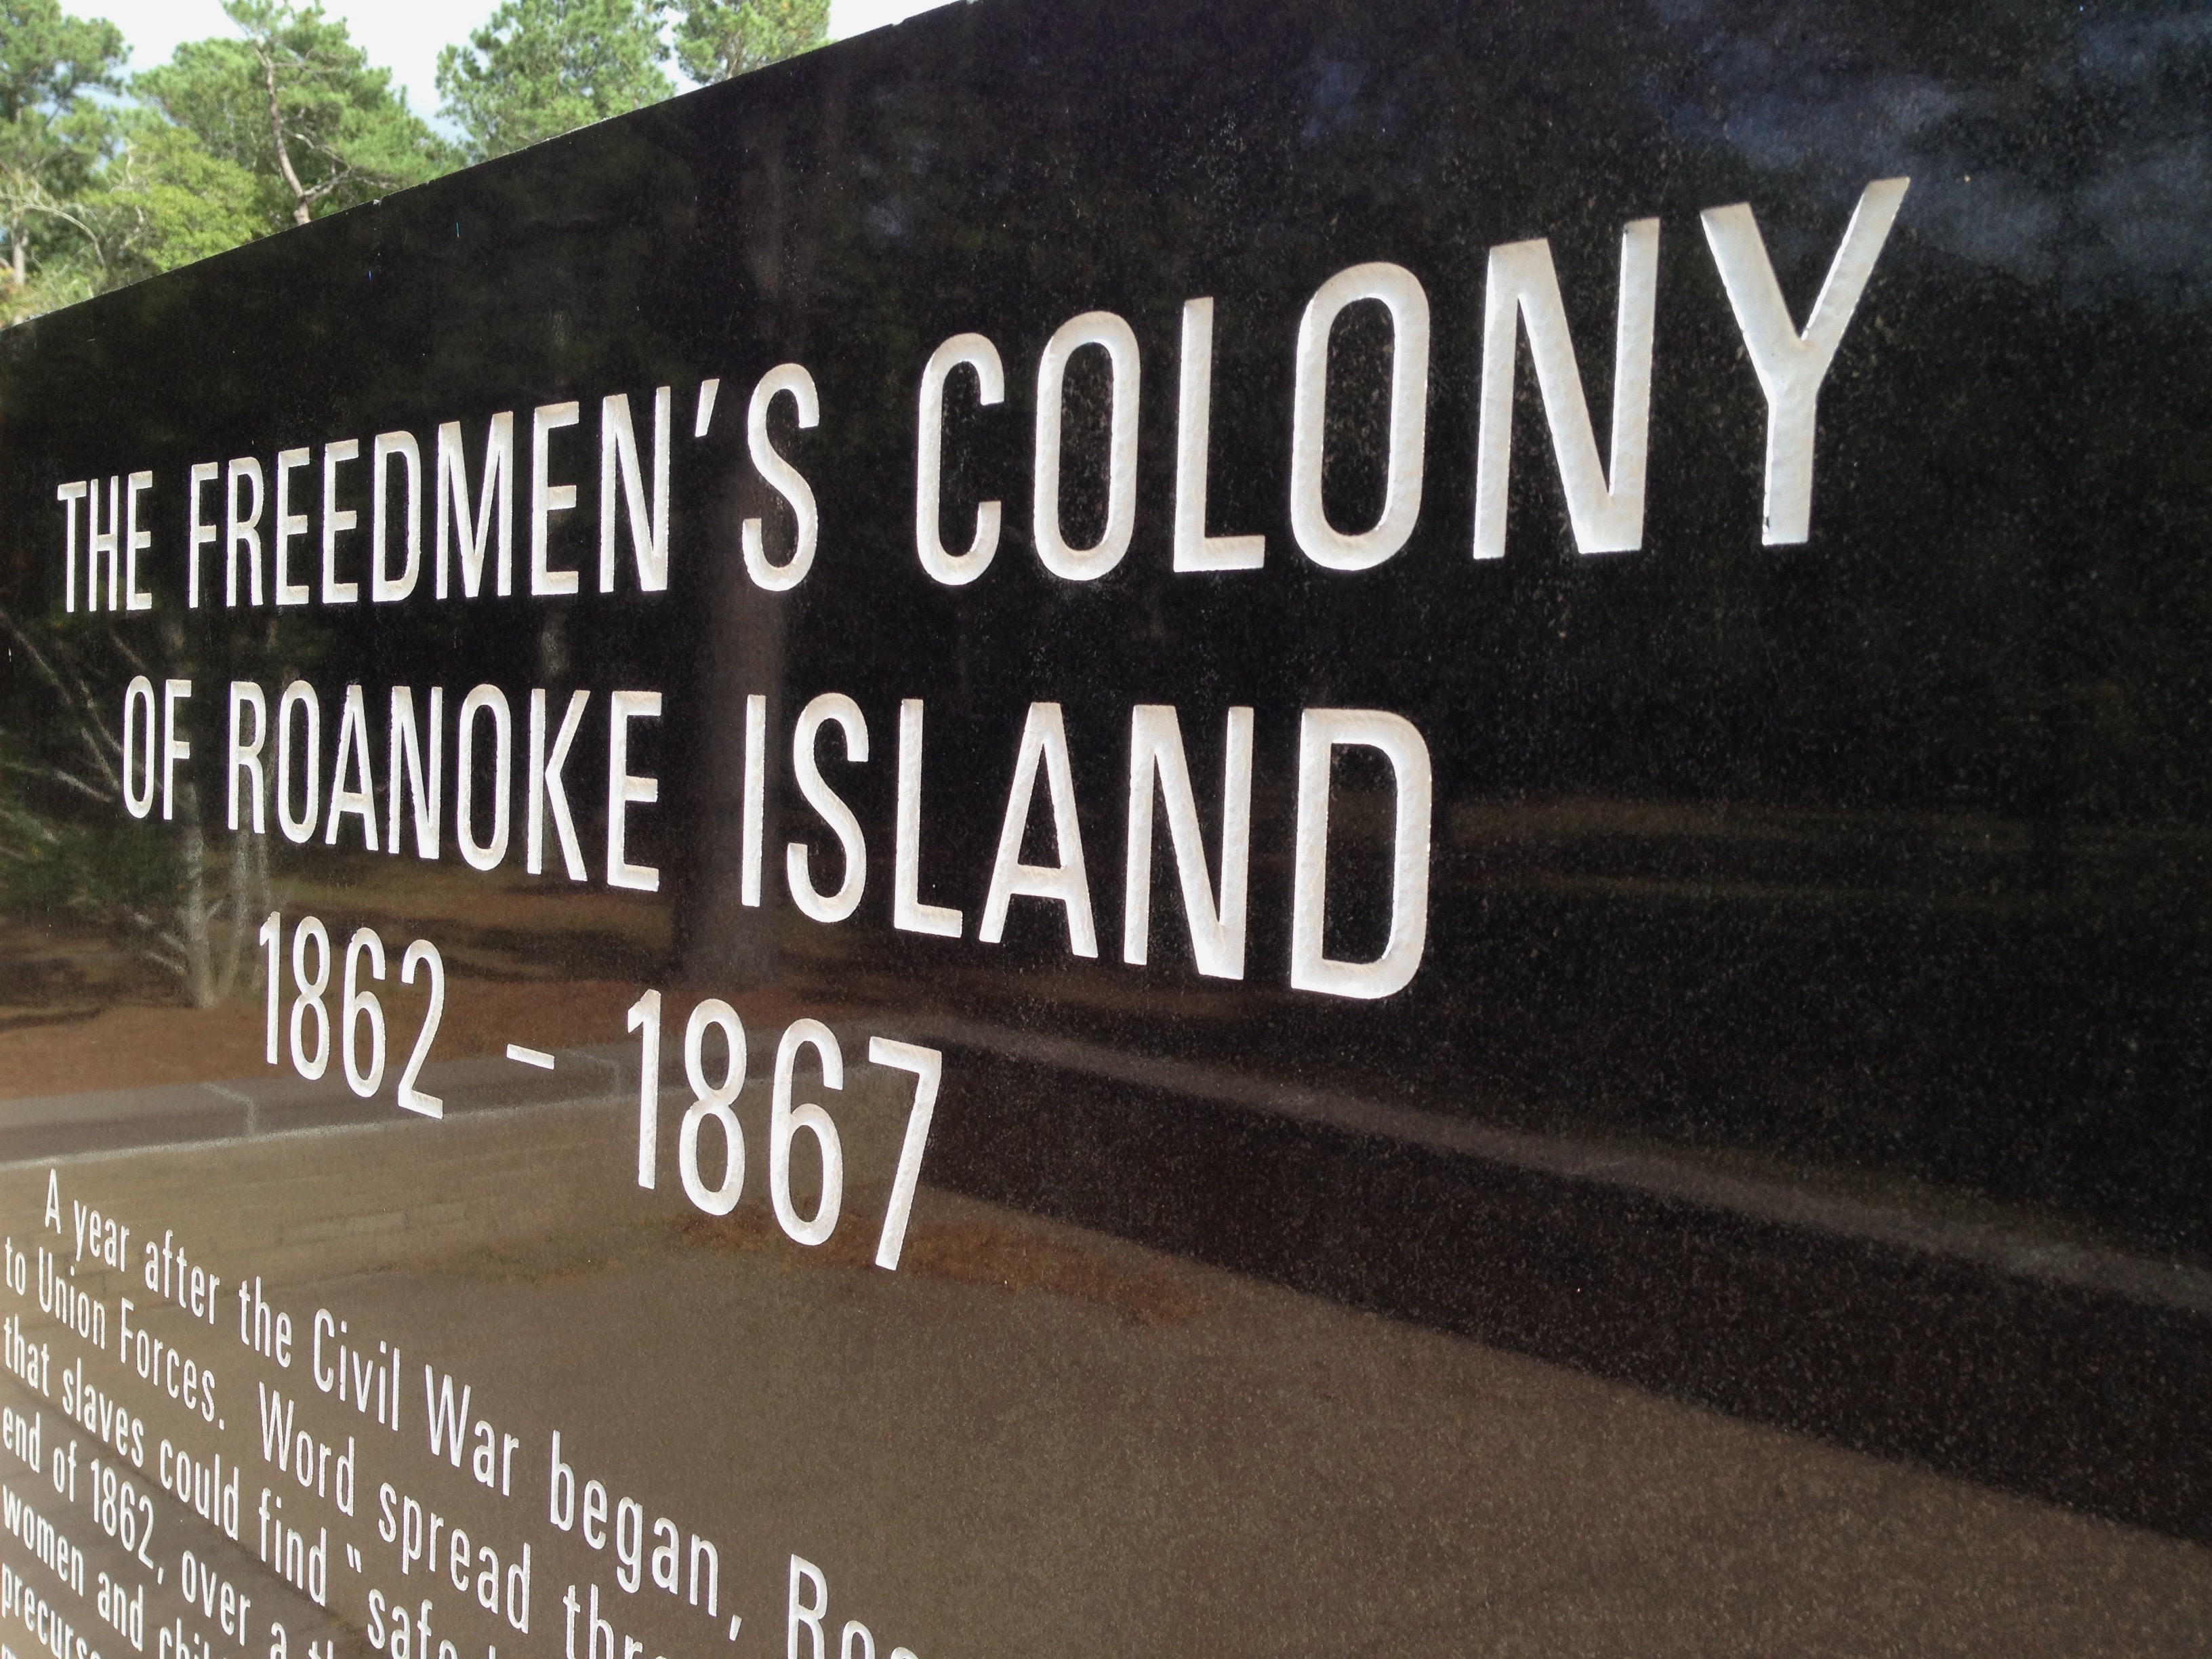 Back of the monument commemorating the Roanoke Island Freedmen's Colony